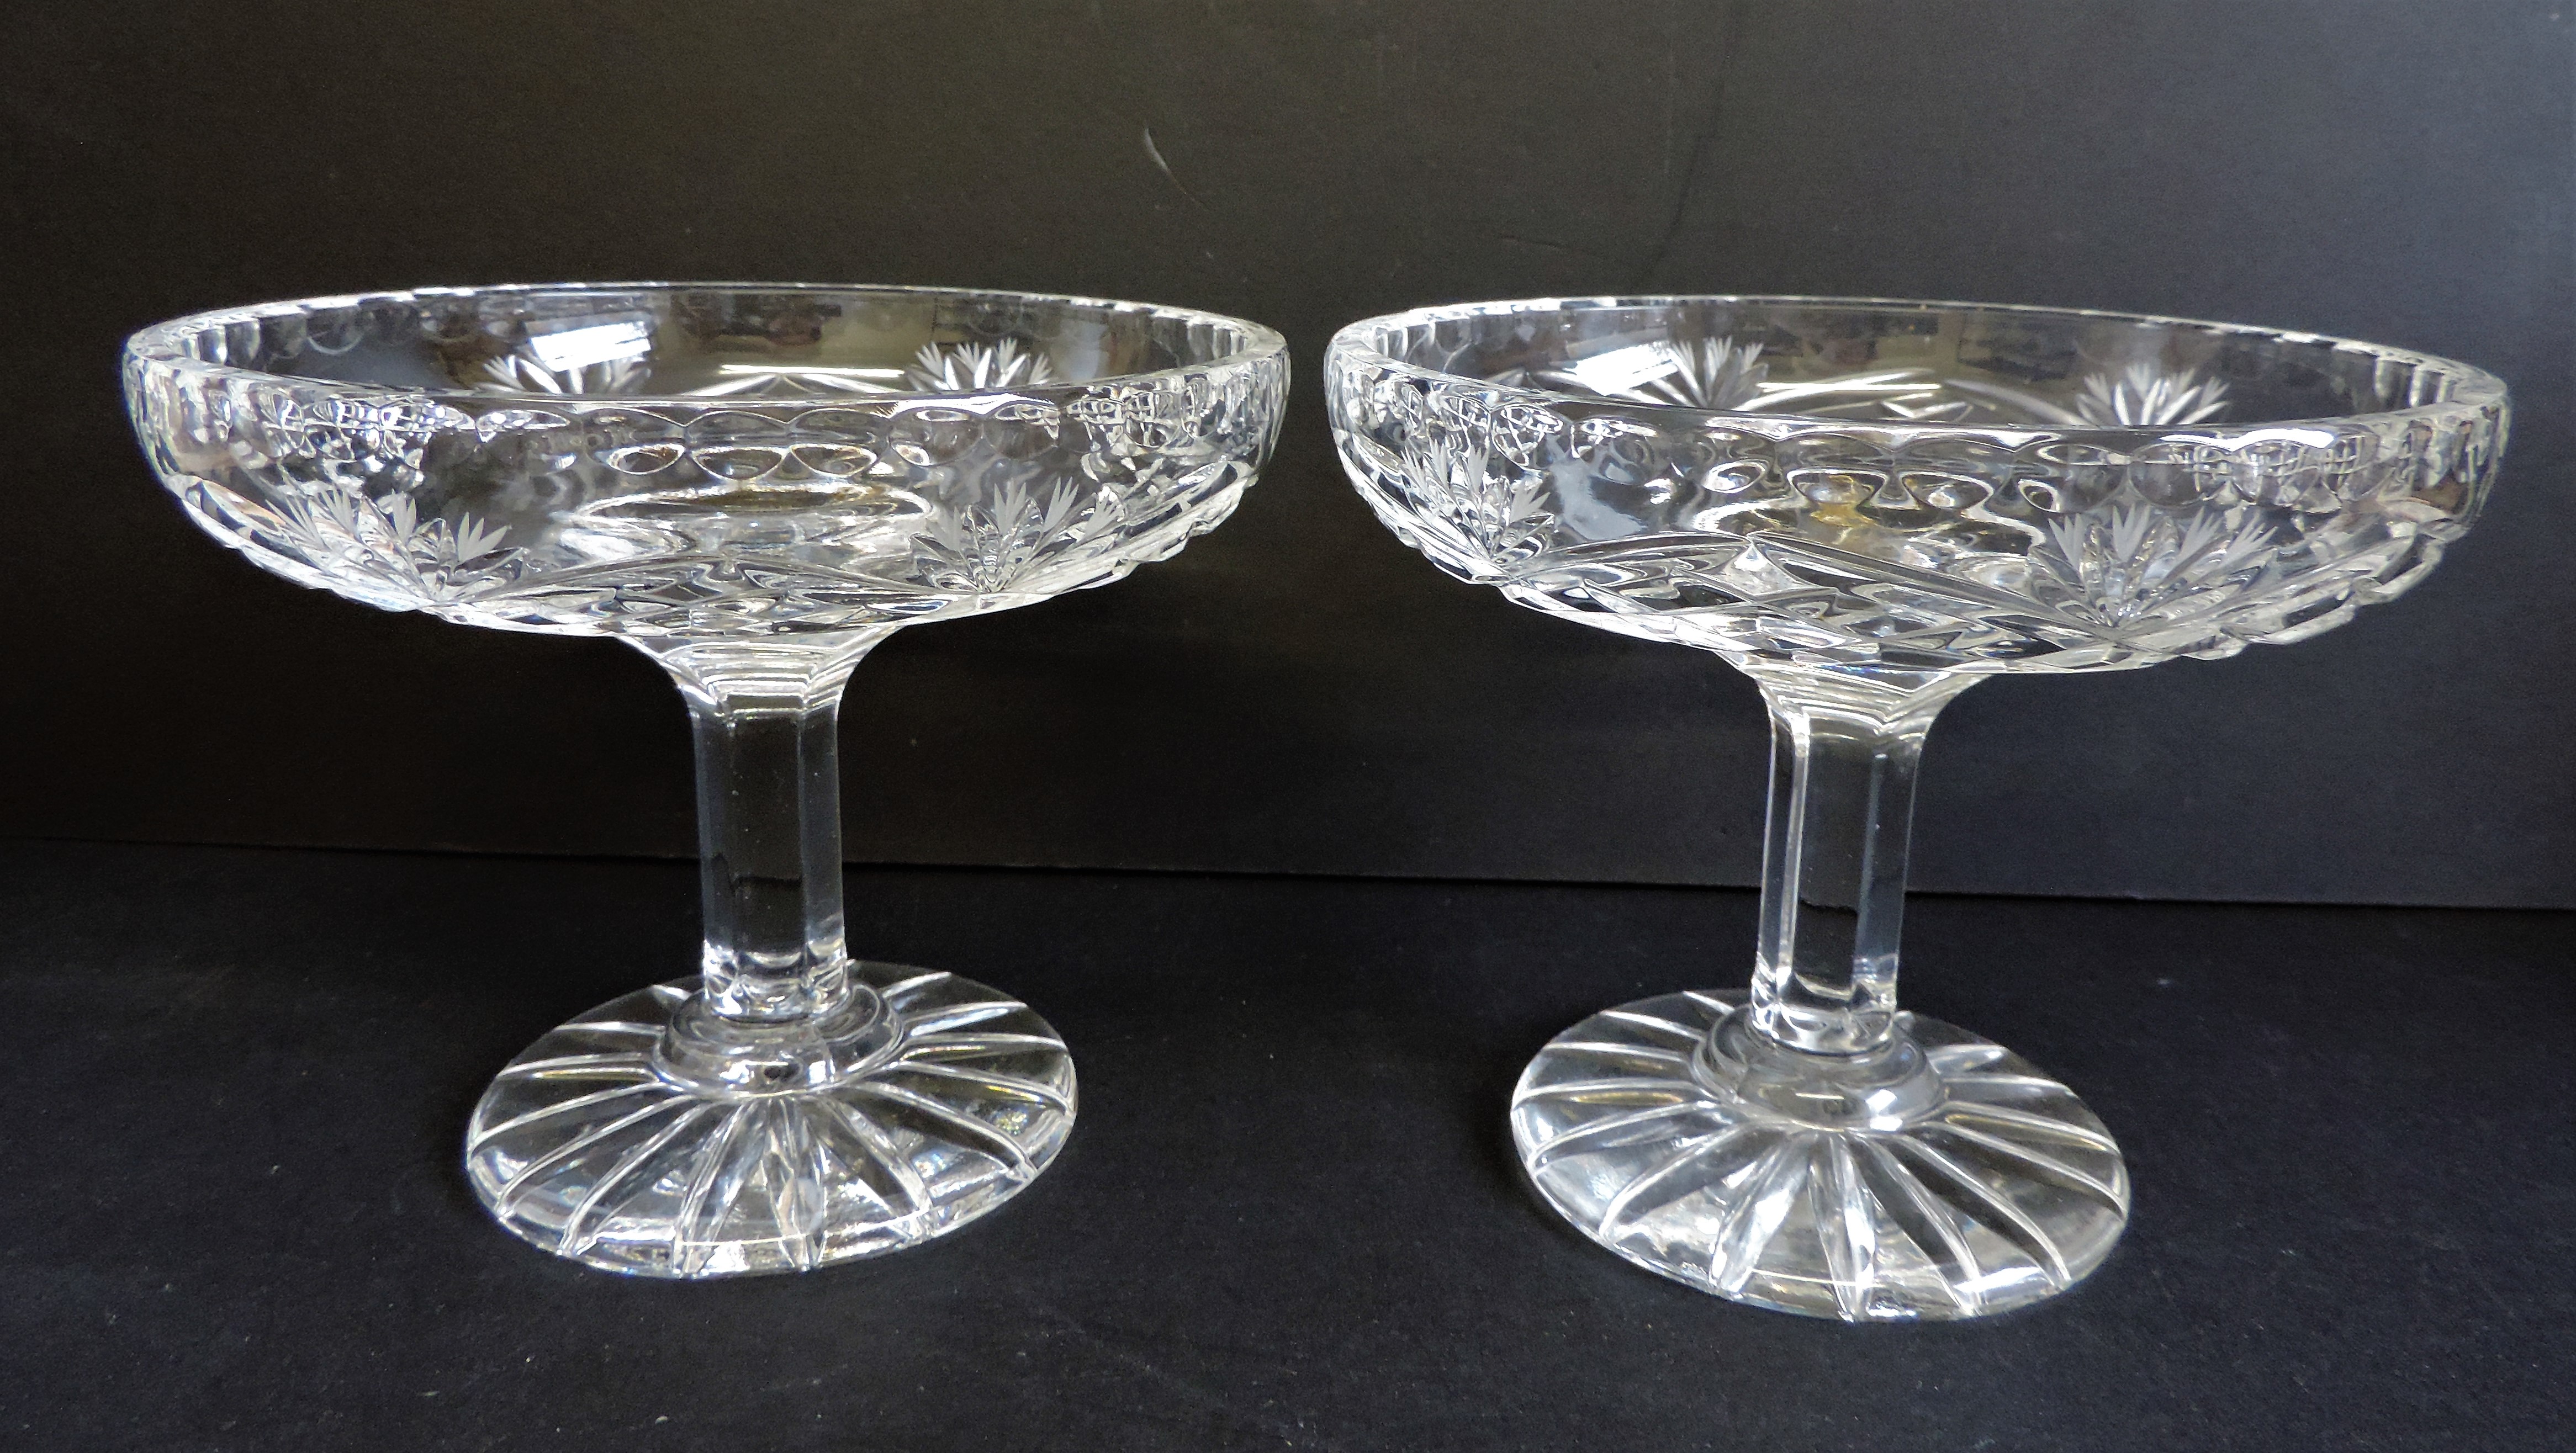 Pair of Hand Cut Crystal Dishes by Zawercie of Poland - Image 5 of 5